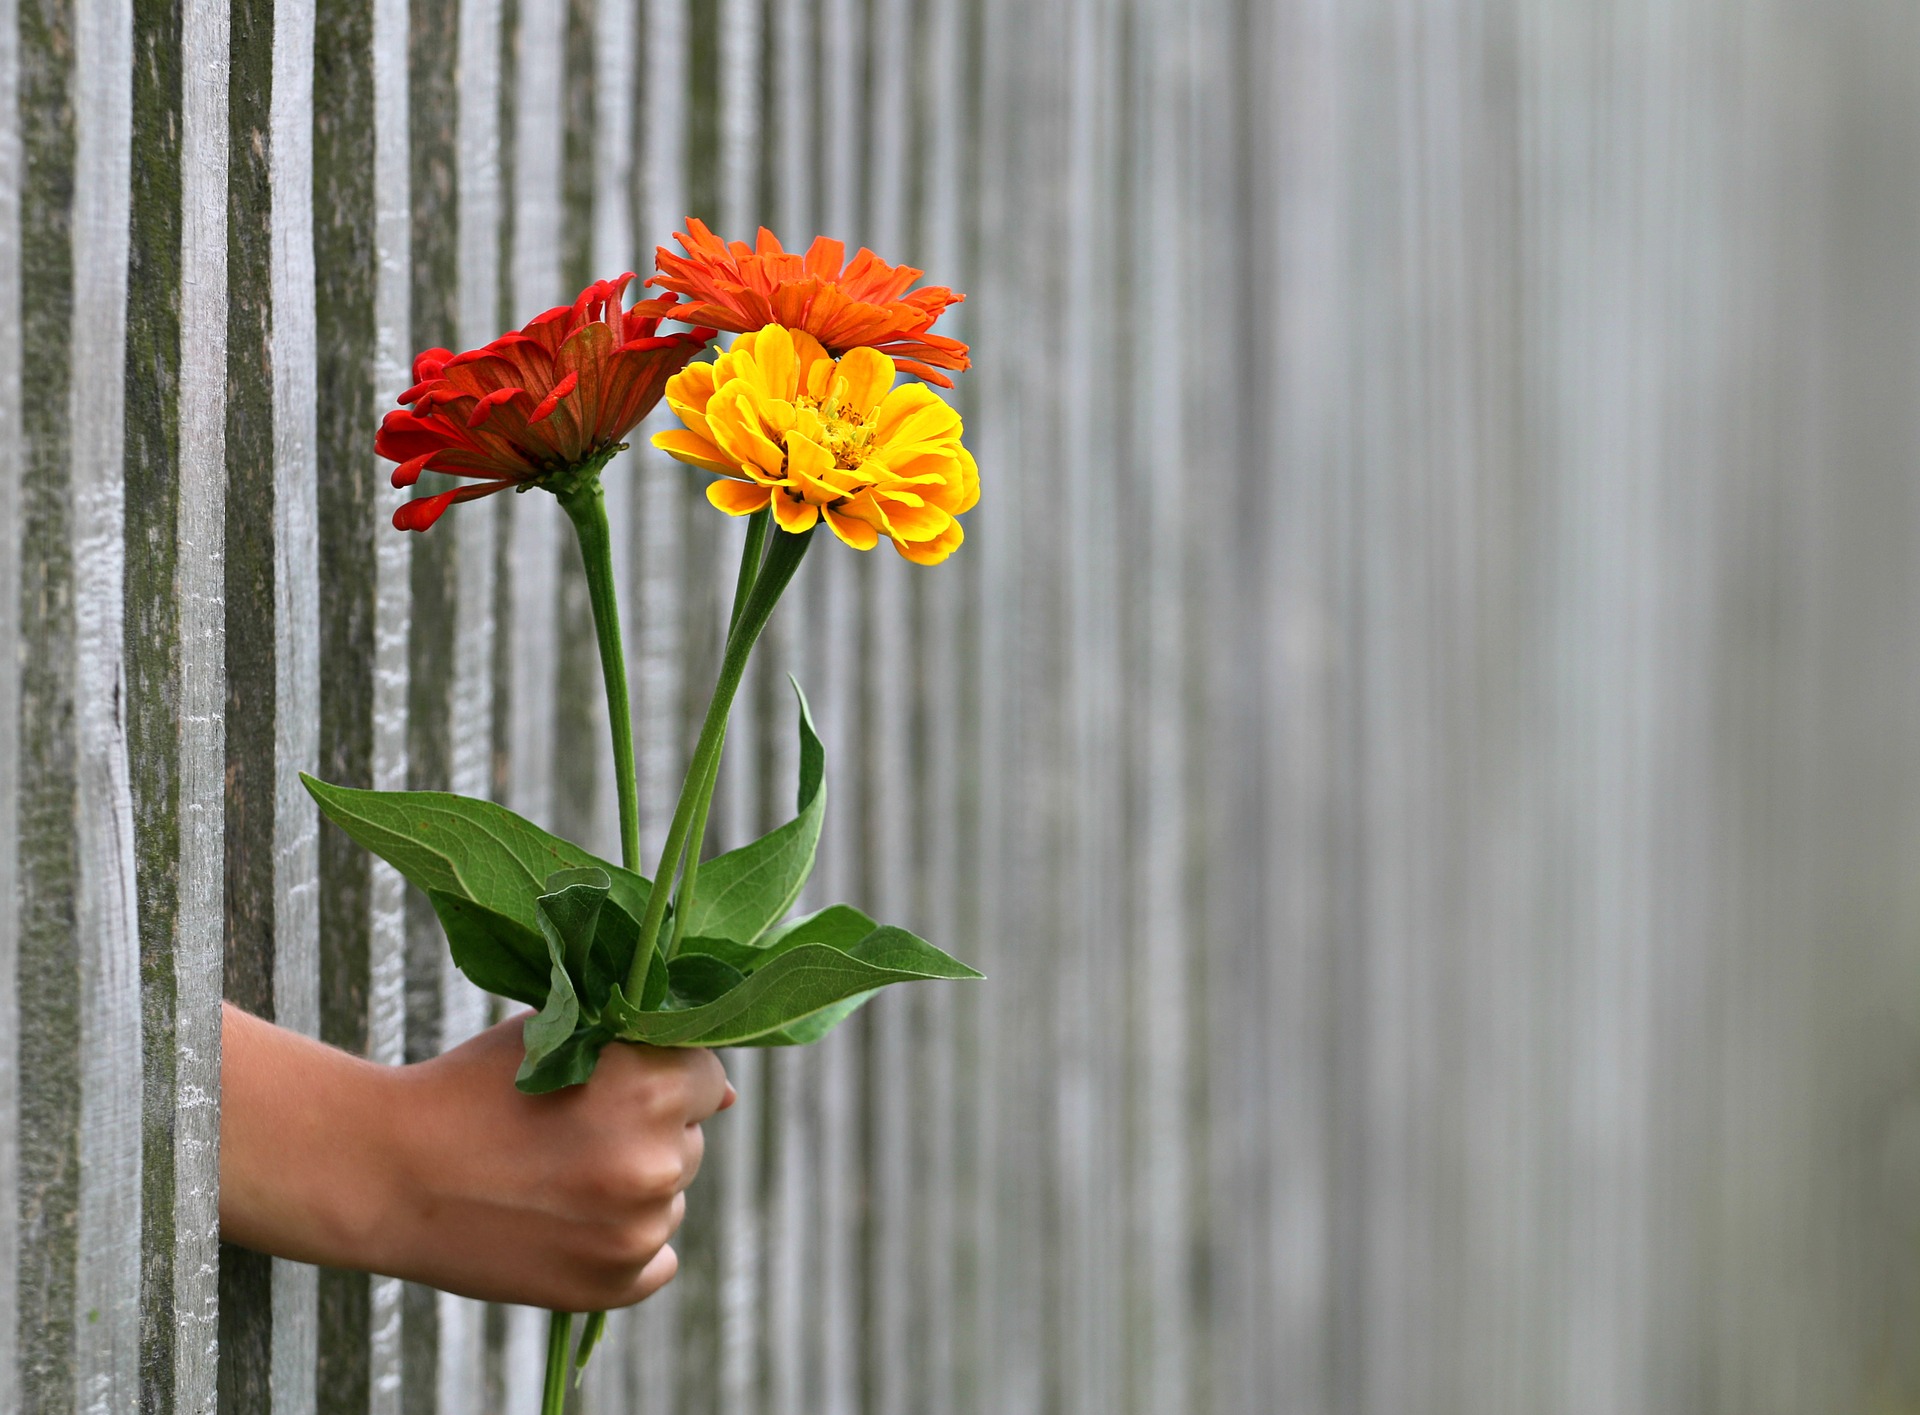 flowers offered through the fence